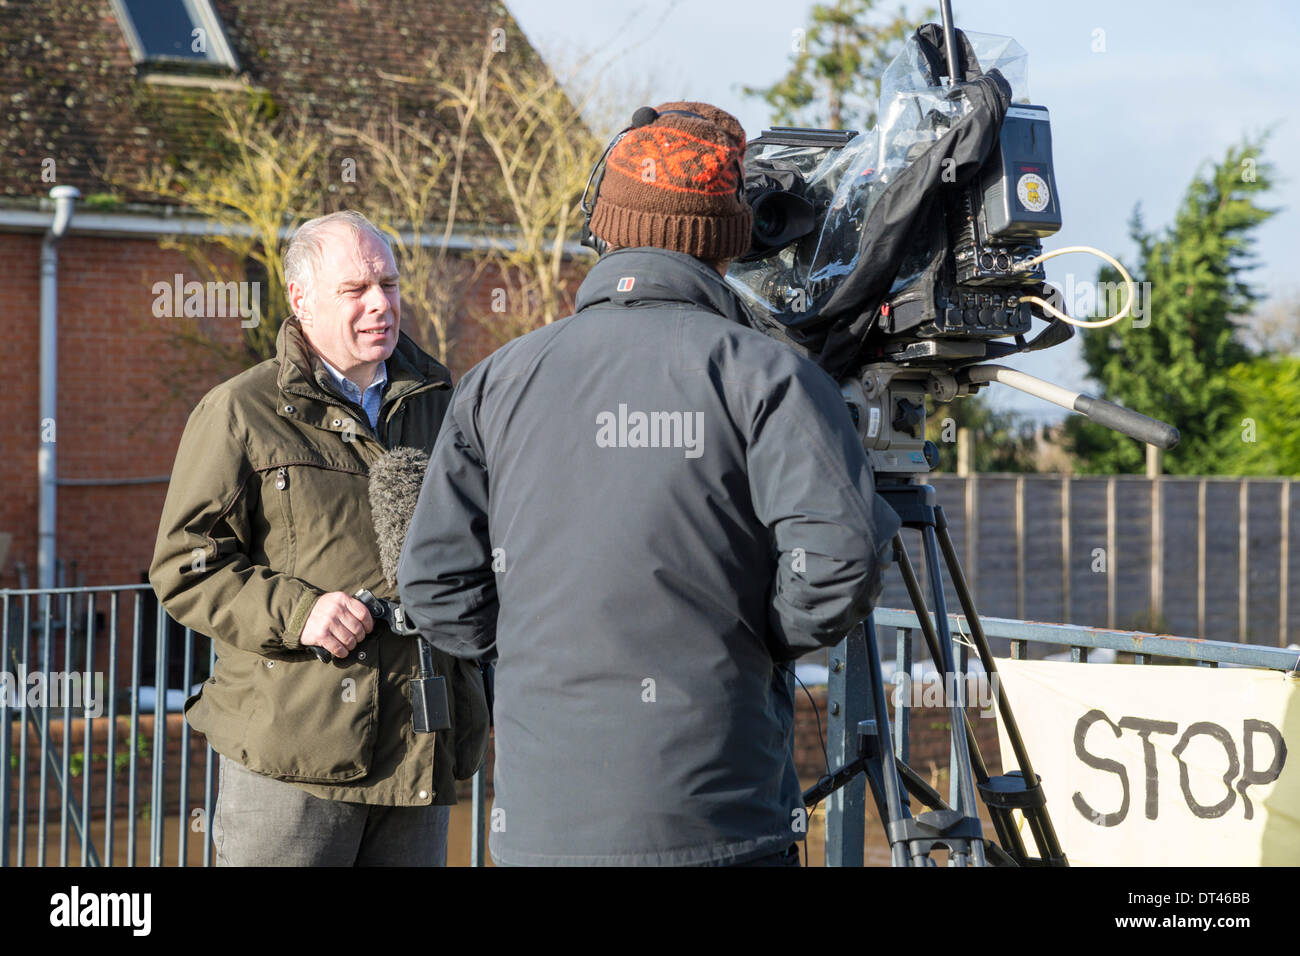 Burrowbridge, Somerset, UK. 8th February 2014. Conservative MP Mr Ian Liddell-Grainger being interviewed by BBC News on 8th February 2014 standing on the bridge over the River Parrett on the A361 at Burrowbridge, Somerset. Due to heavy rainfall, the rivers Parrett and Tone have burst their banks flooding nearby farmland and leaving houses underwater. Following visits by Lord Chris Smith and David Cameron yesterday, a severe flood alert remains and some occupants have been told to evacuate. The Somerset Levels have experienced the worst flooding in living history. Credit:  Nick Cable/Alamy Live Stock Photo